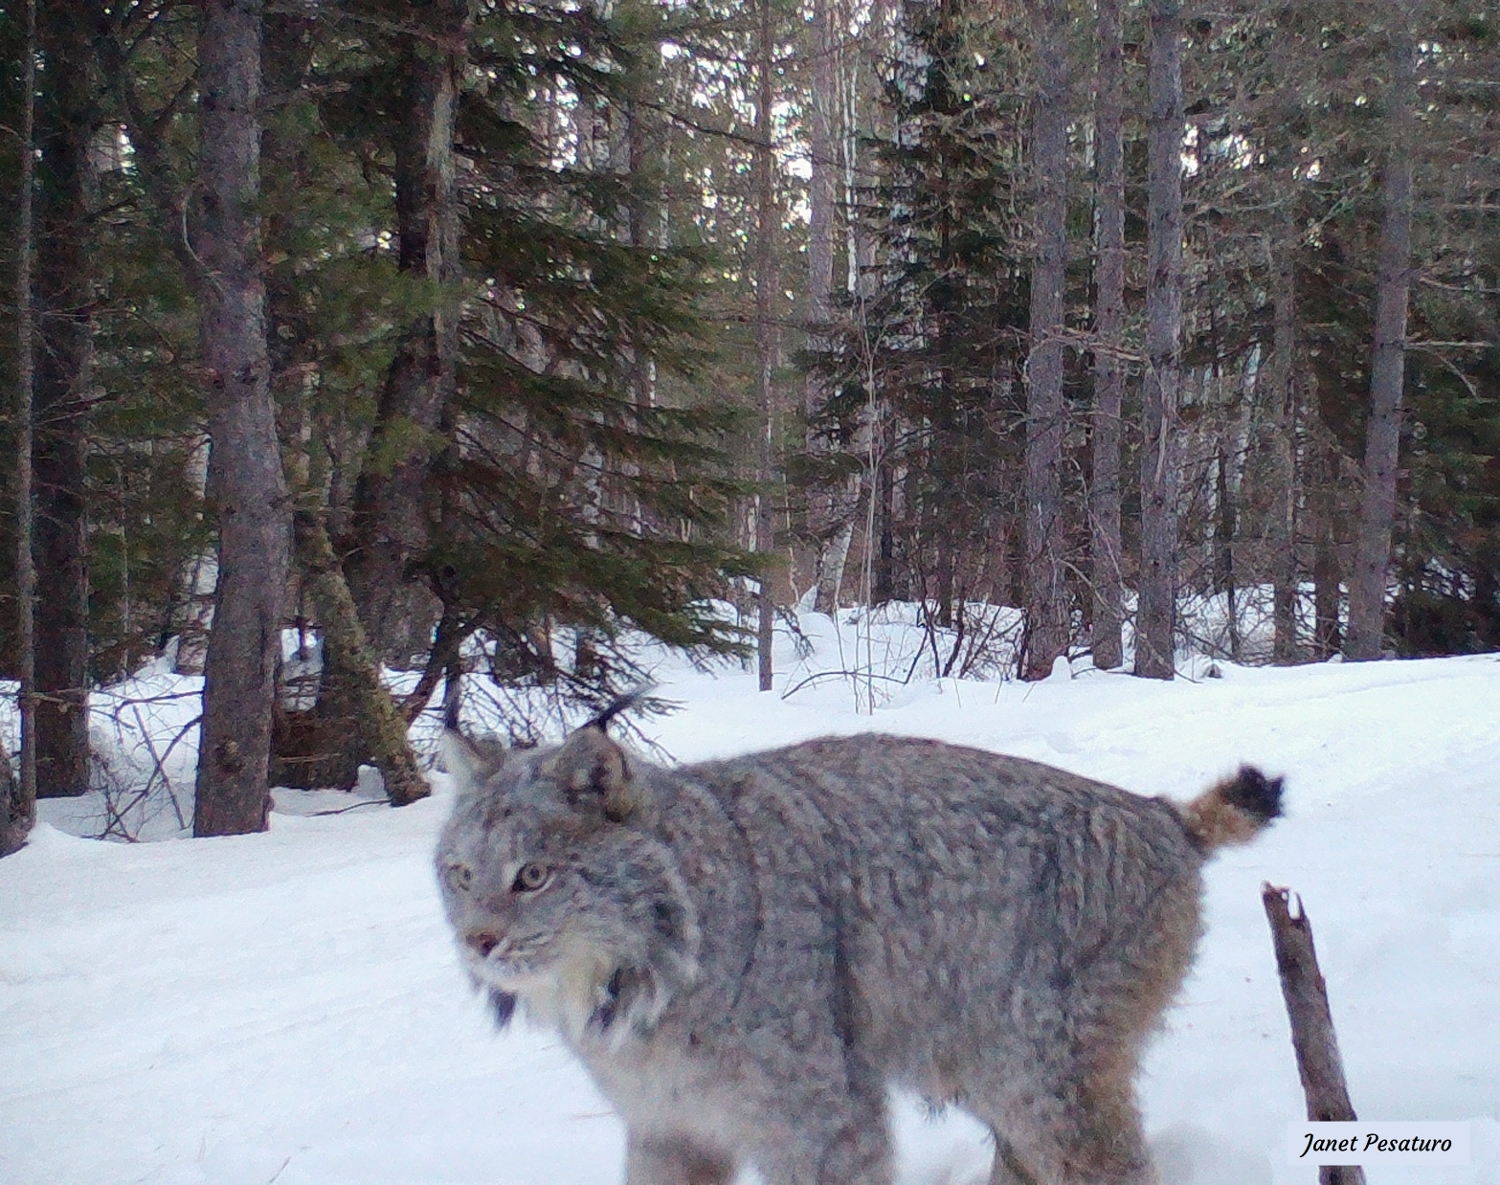 canada lynx spraying its scent post